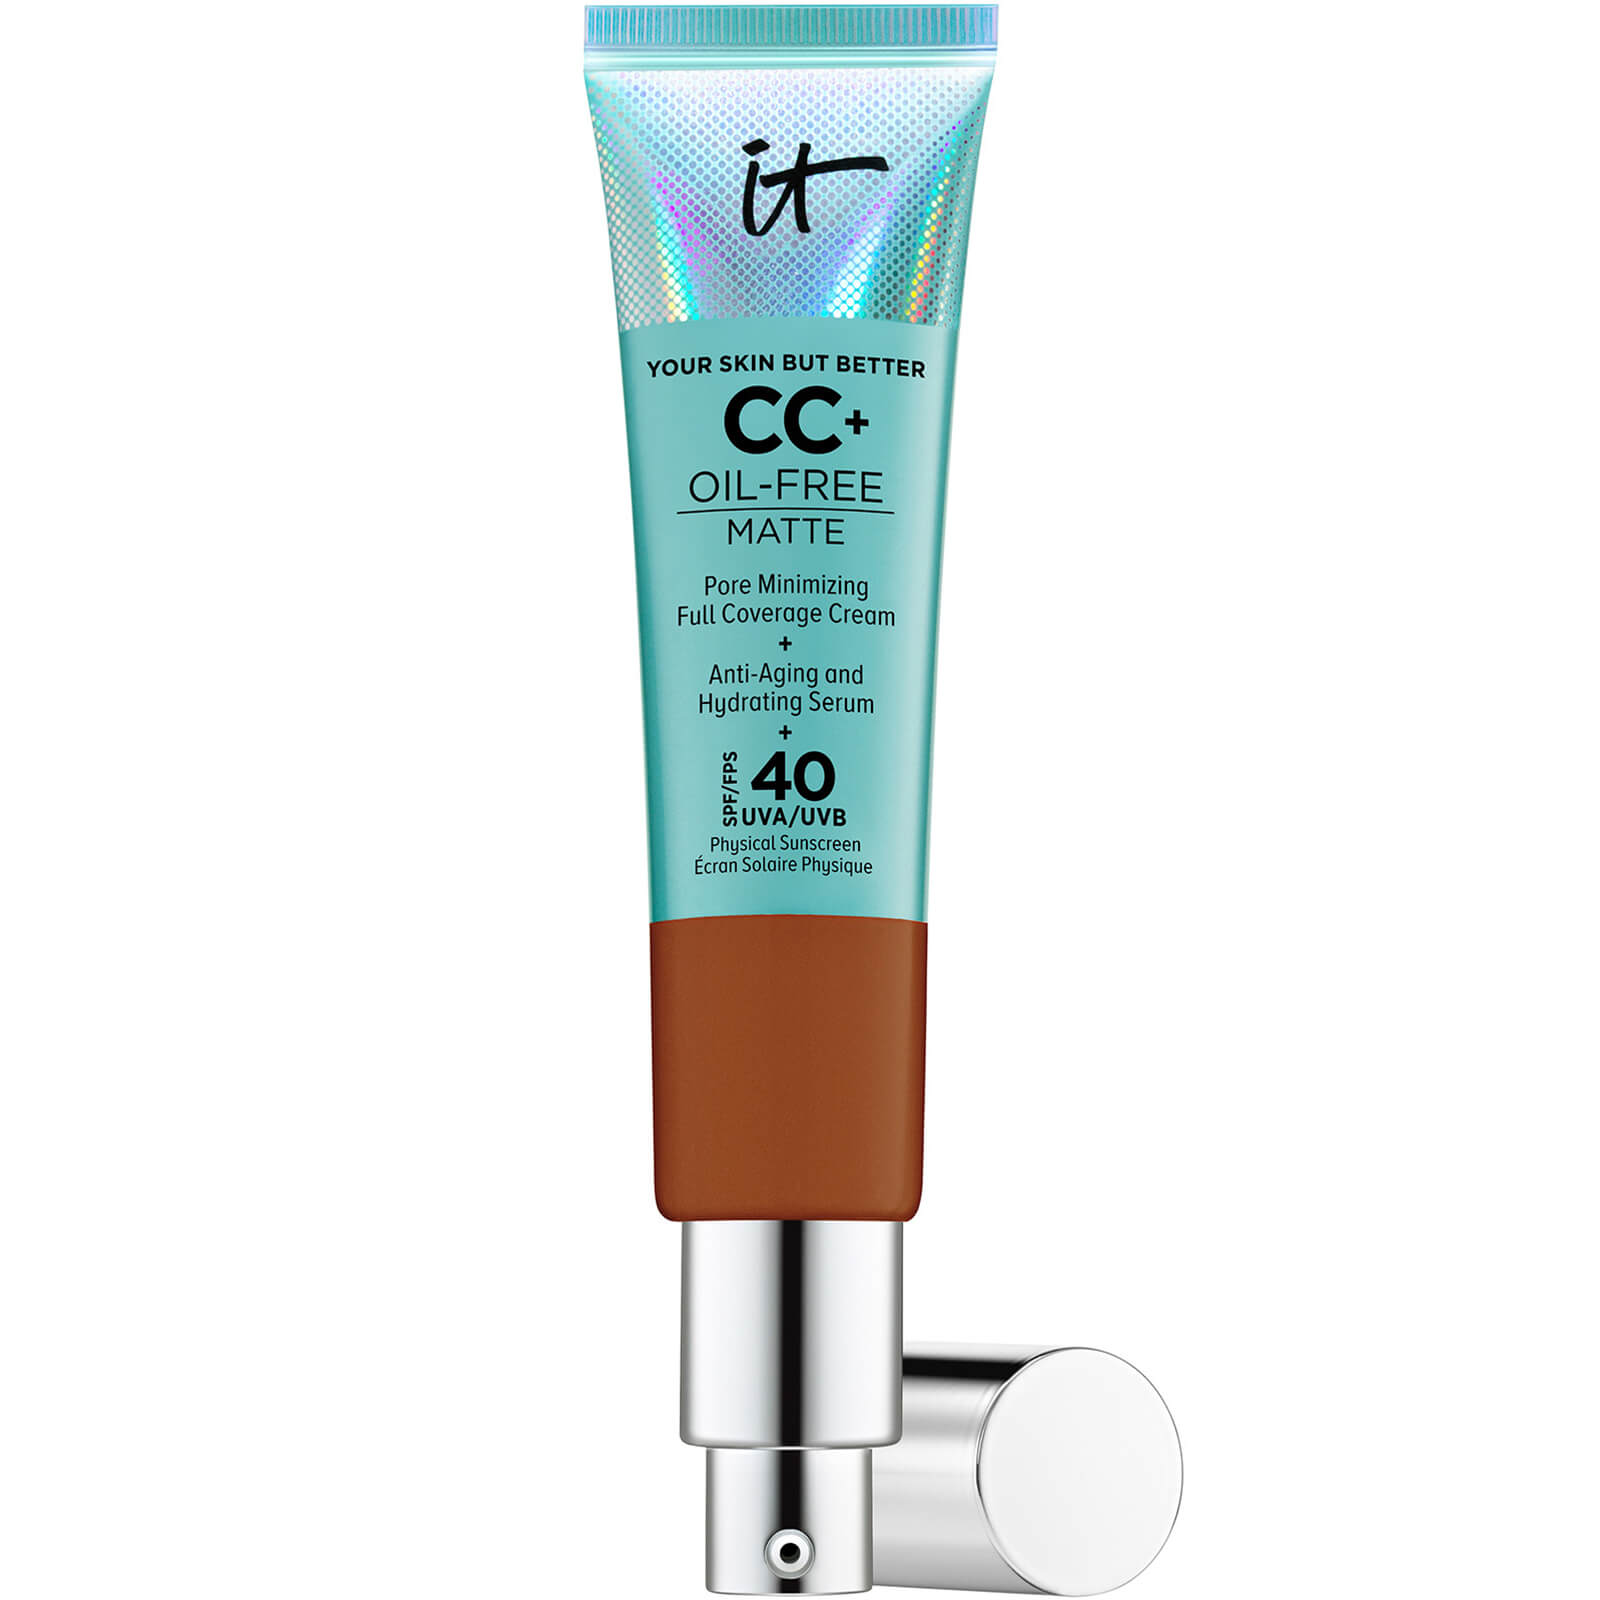 IT Cosmetics Your Skin But Better CC+ Oil-Free Matte SPF40 32ml (Various Shades) - Rich Honey